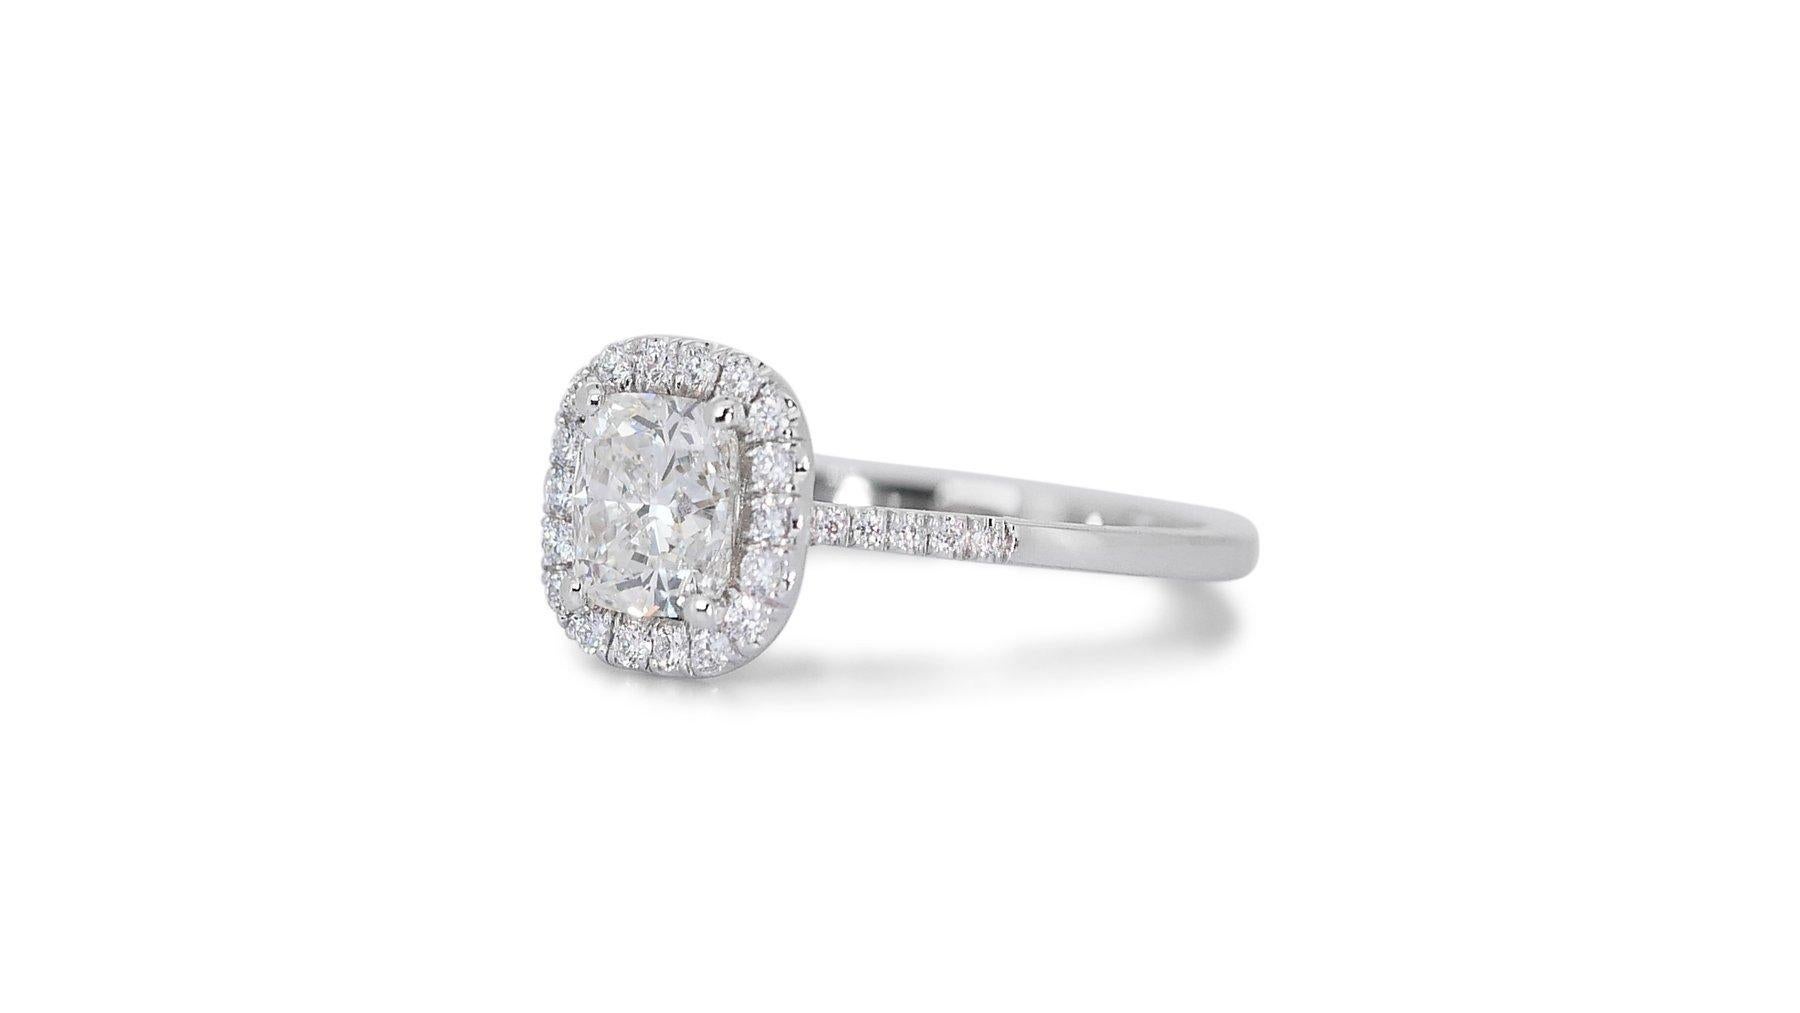 Cushion Cut Luxurious 1.71ct Diamond Halo Ring in 18k White Gold - GIA Certified For Sale